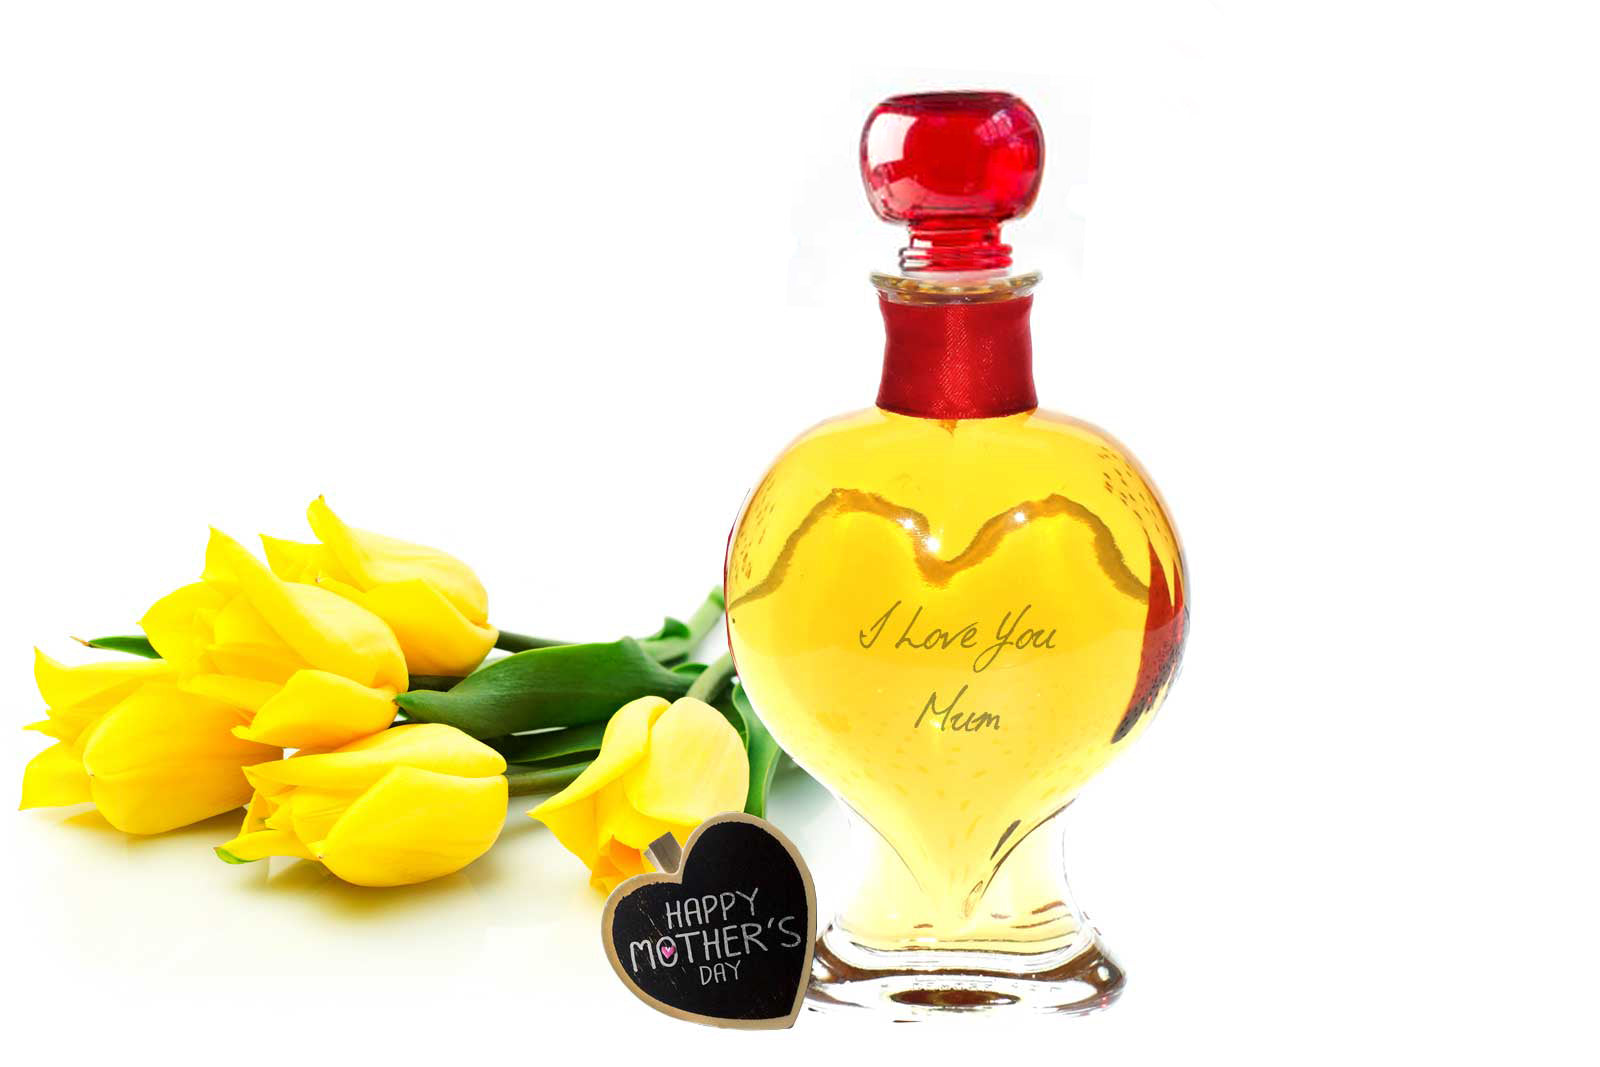 Heart Decanter 200ml with Rhubarb Gin - 26%